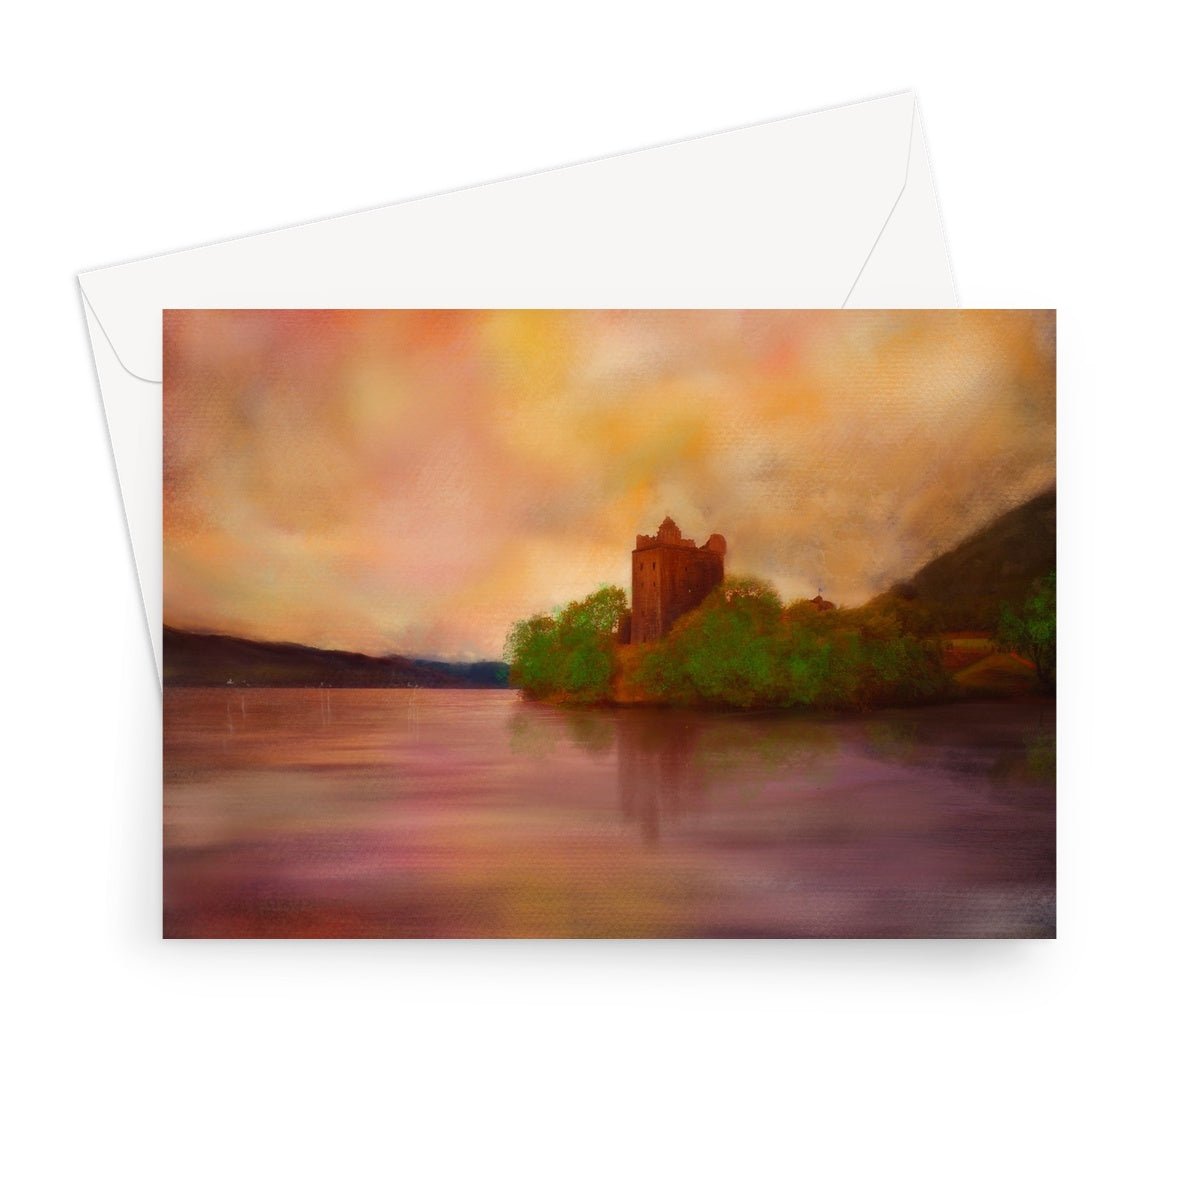 Urquhart Castle Art Gifts Greeting Card-Greetings Cards-Scottish Castles Art Gallery-7"x5"-1 Card-Paintings, Prints, Homeware, Art Gifts From Scotland By Scottish Artist Kevin Hunter